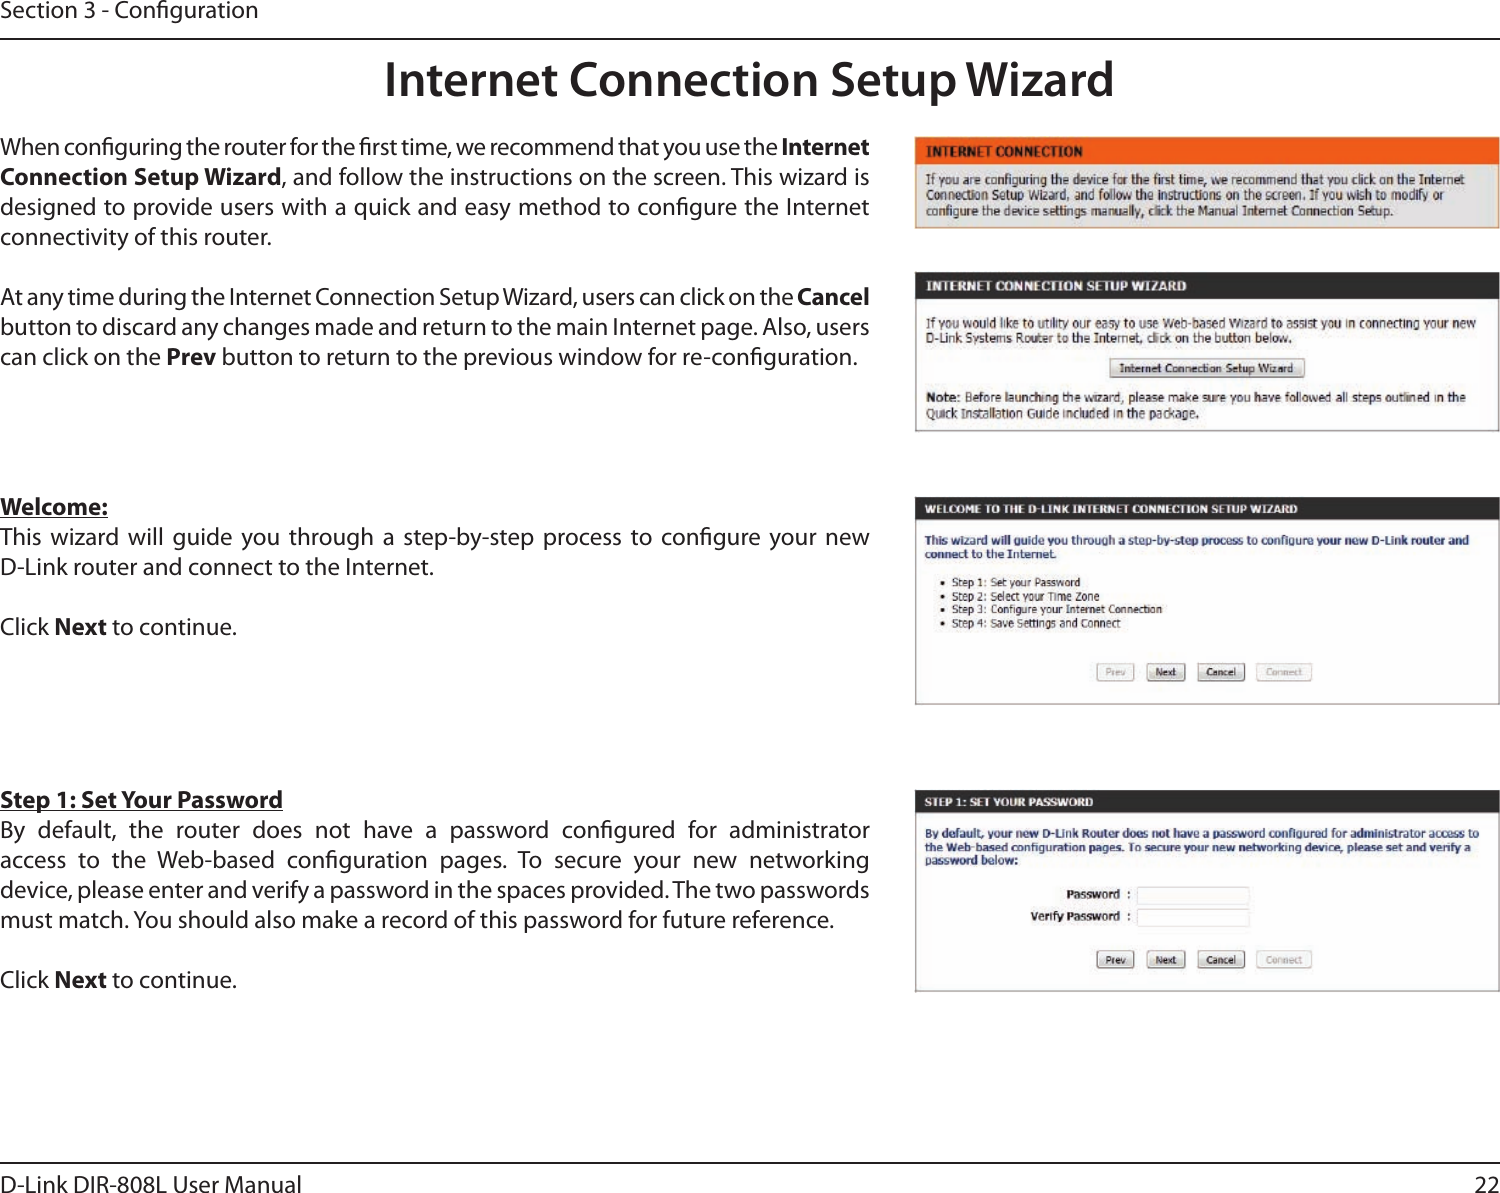 22D-Link DIR-808L User ManualSection 3 - CongurationInternet Connection Setup WizardWhen conguring the router for the rst time, we recommend that you use the Internet Connection Setup Wizard, and follow the instructions on the screen. This wizard is designed to provide users with a quick and easy method to congure the Internet connectivity of this router.At any time during the Internet Connection Setup Wizard, users can click on the Cancel button to discard any changes made and return to the main Internet page. Also, users can click on the Prev button to return to the previous window for re-conguration.Welcome:This  wizard  will  guide  you  through  a  step-by-step  process  to  congure  your  new  D-Link router and connect to the Internet. Click Next to continue.Step 1: Set Your PasswordBy  default,  the  router  does  not  have  a  password  congured  for  administrator  access  to  the  Web-based  conguration  pages.  To  secure  your  new  networking  device, please enter and verify a password in the spaces provided. The two passwords must match. You should also make a record of this password for future reference. Click Next to continue.